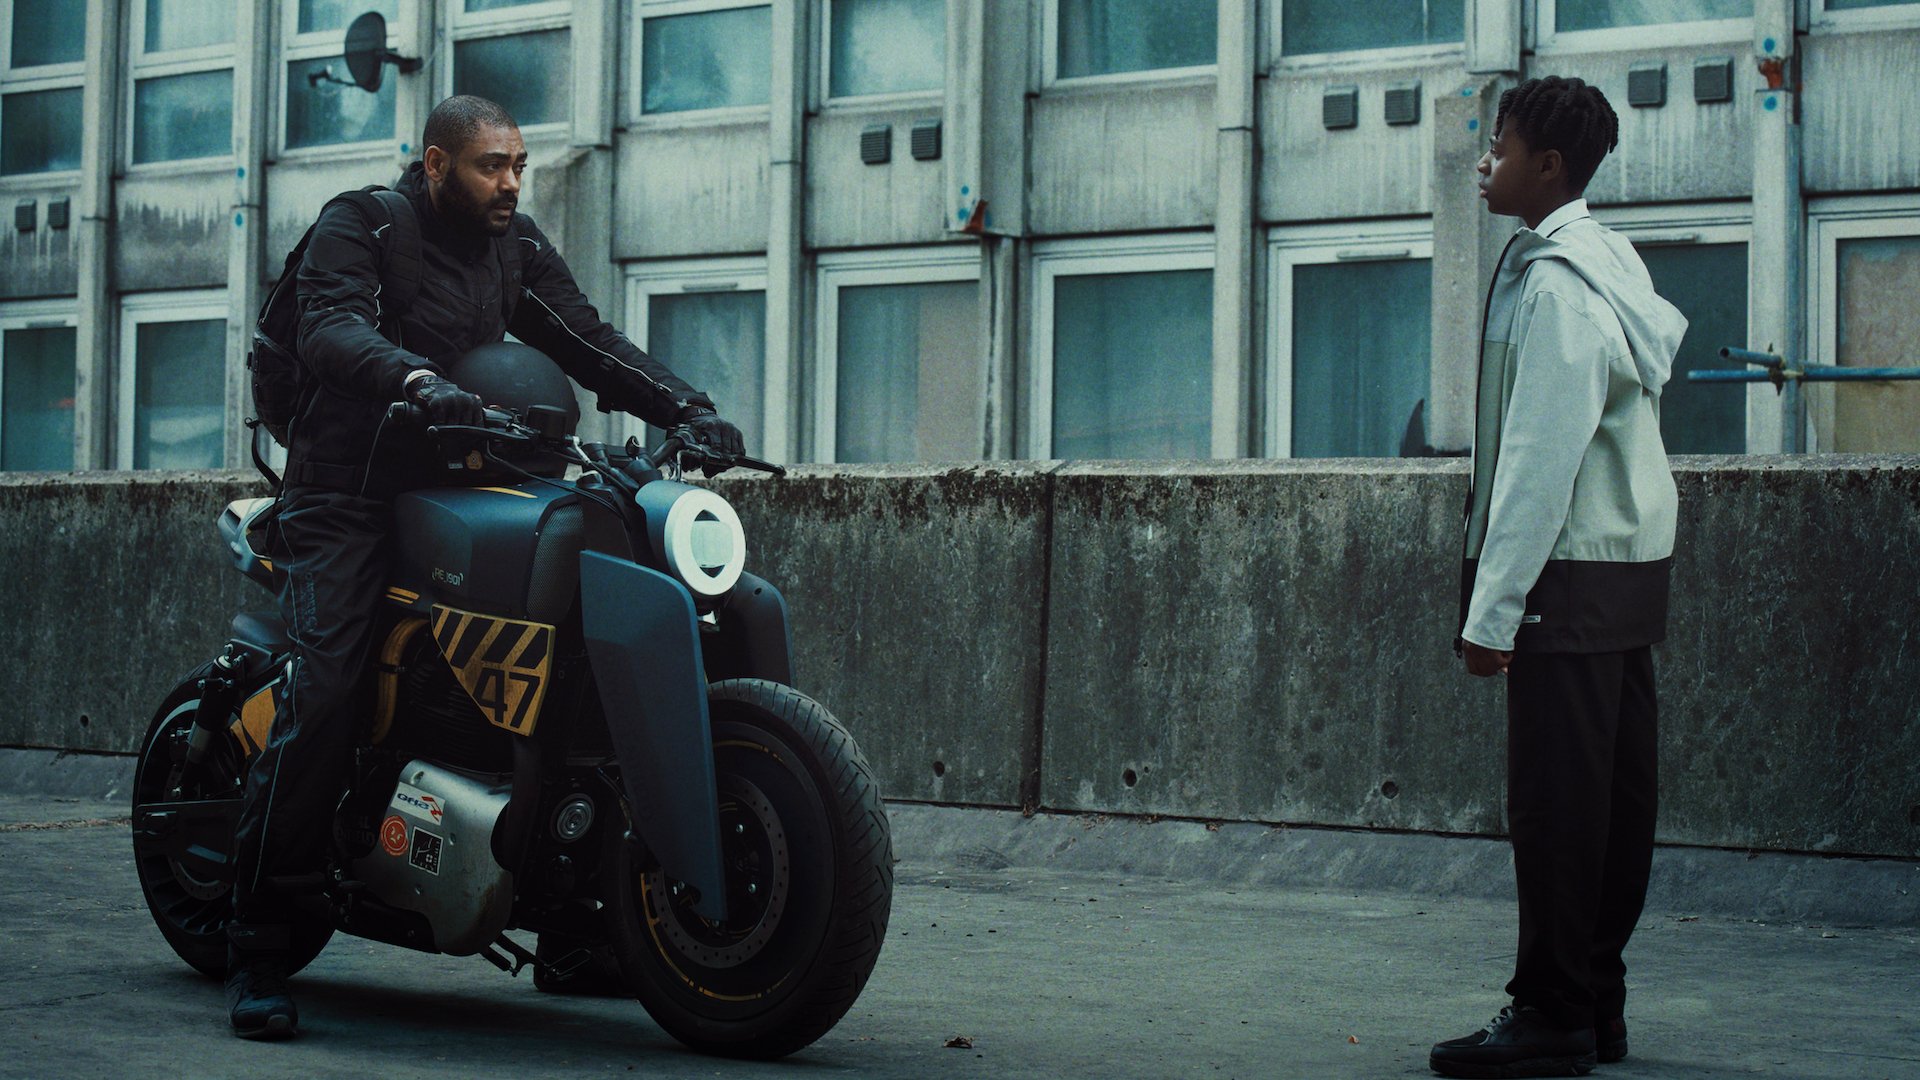 A man on a motorbike faces a young boy on a grey-lit street.